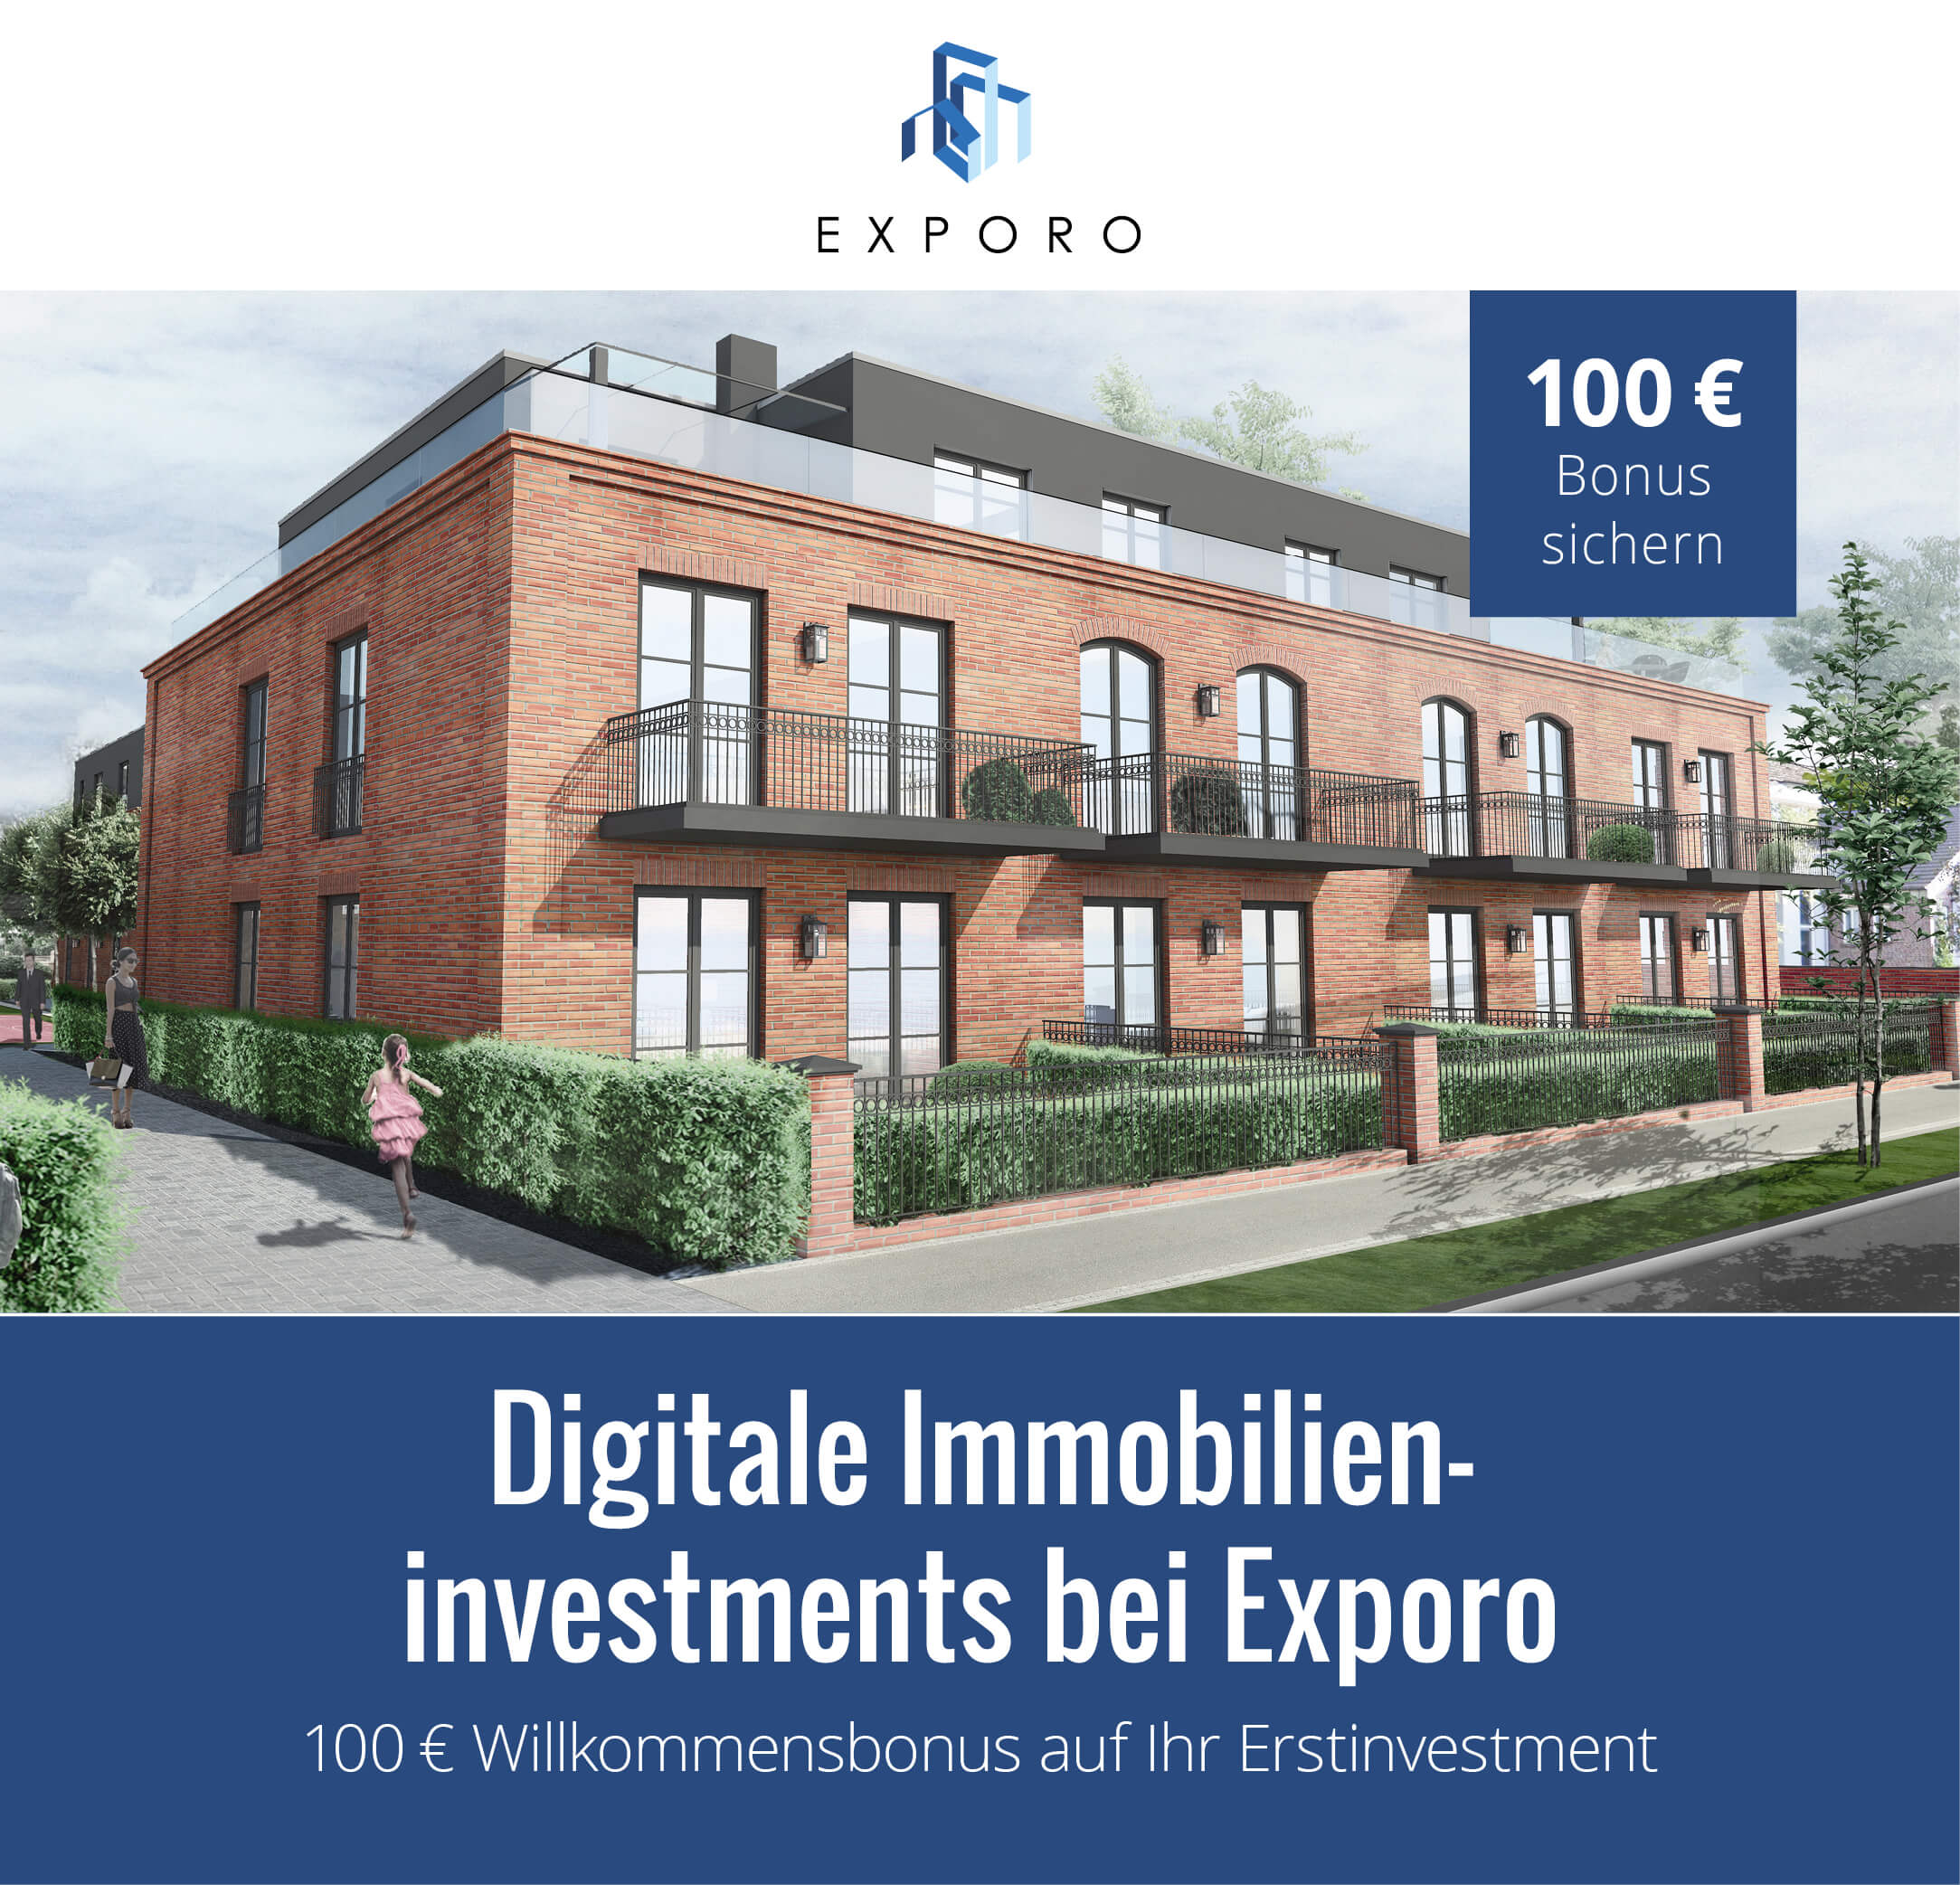 Digitale Immobilieninvestments bei Exporo